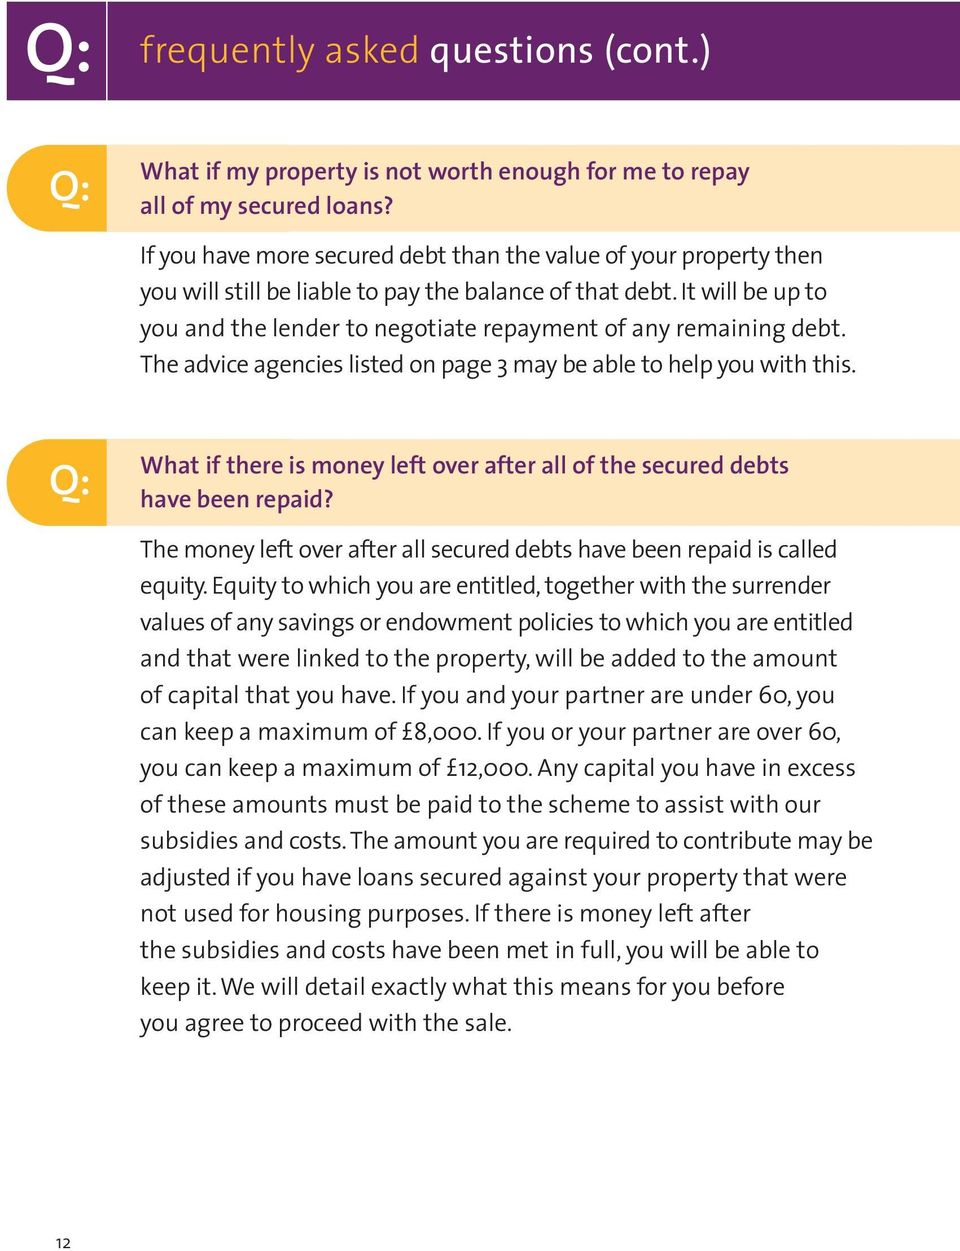 It will be up to you and the lender to negotiate repayment of any remaining debt. The advice agencies listed on page 3 may be able to help you with this.